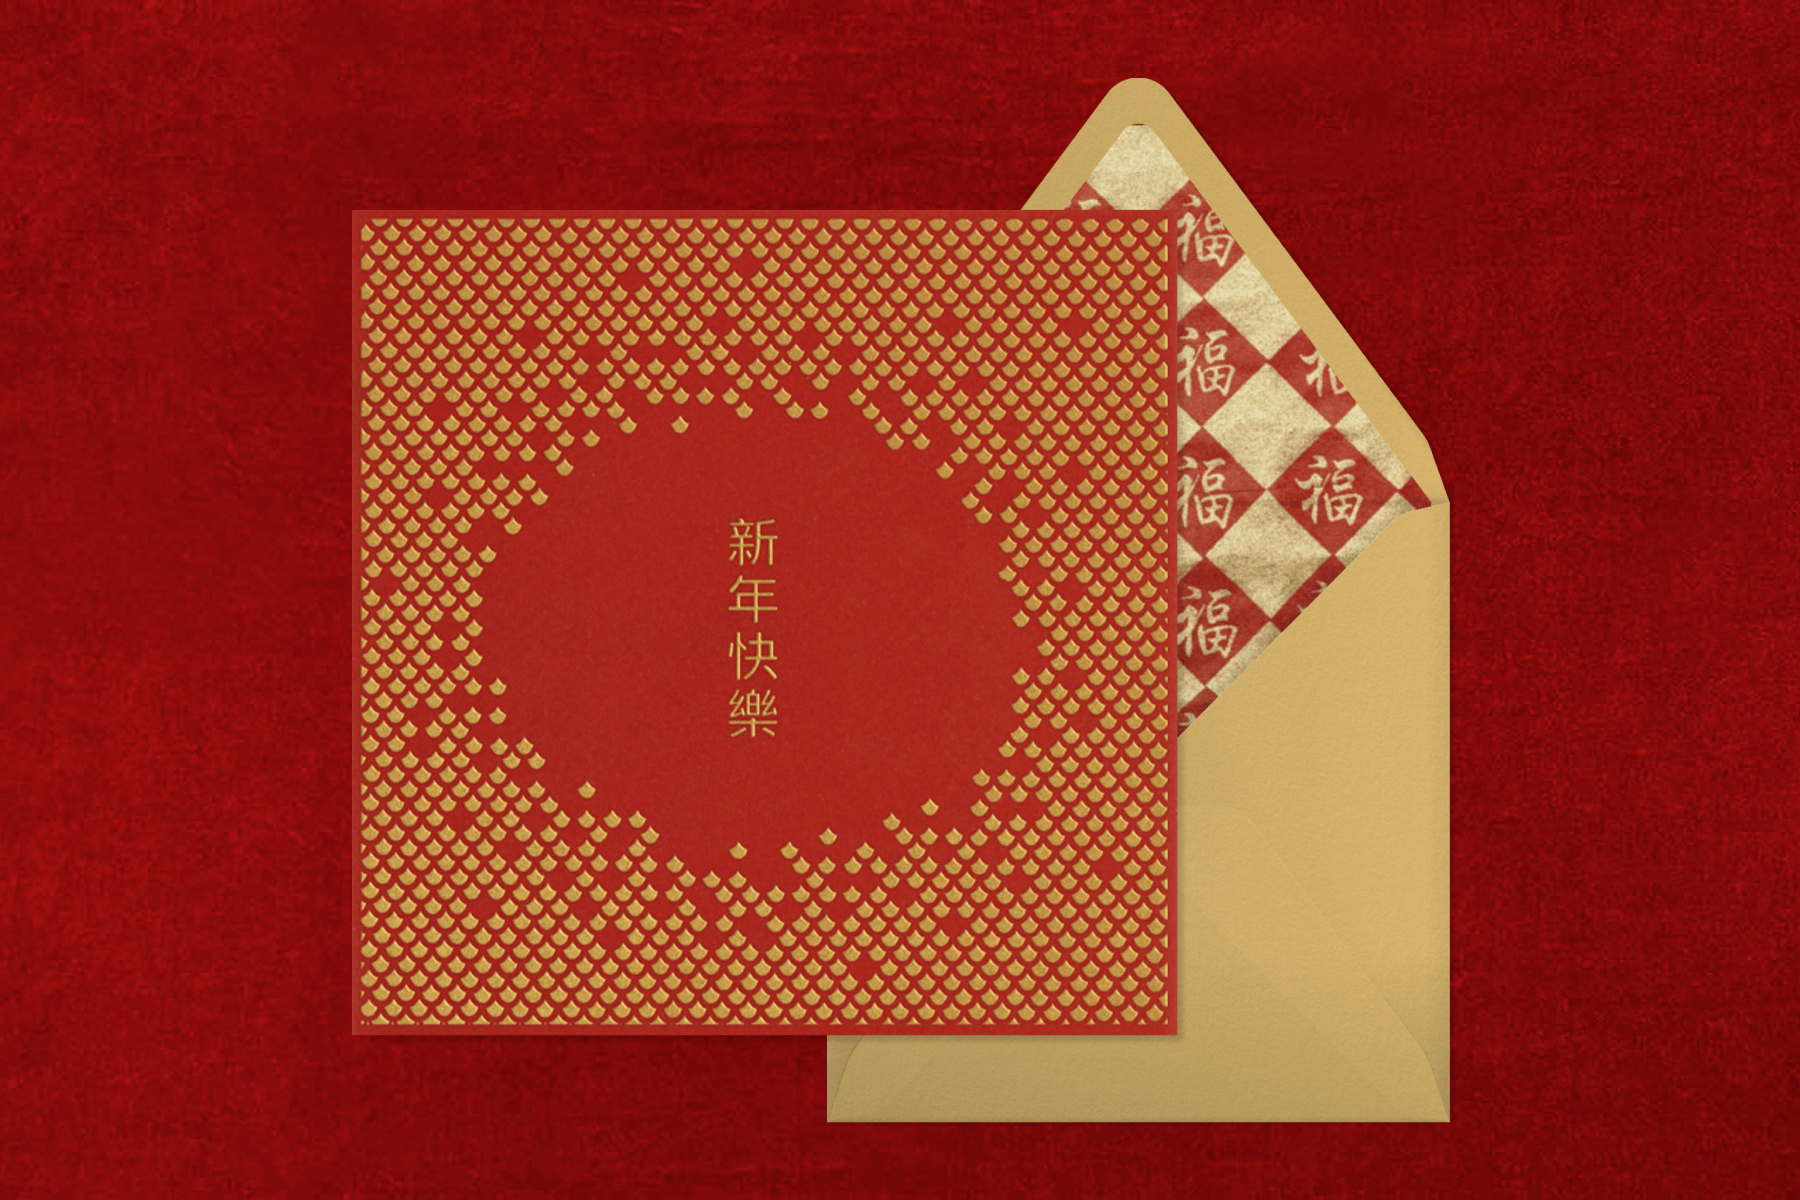 A red invitation with gold scales and Chinese characters with a gold envelope.